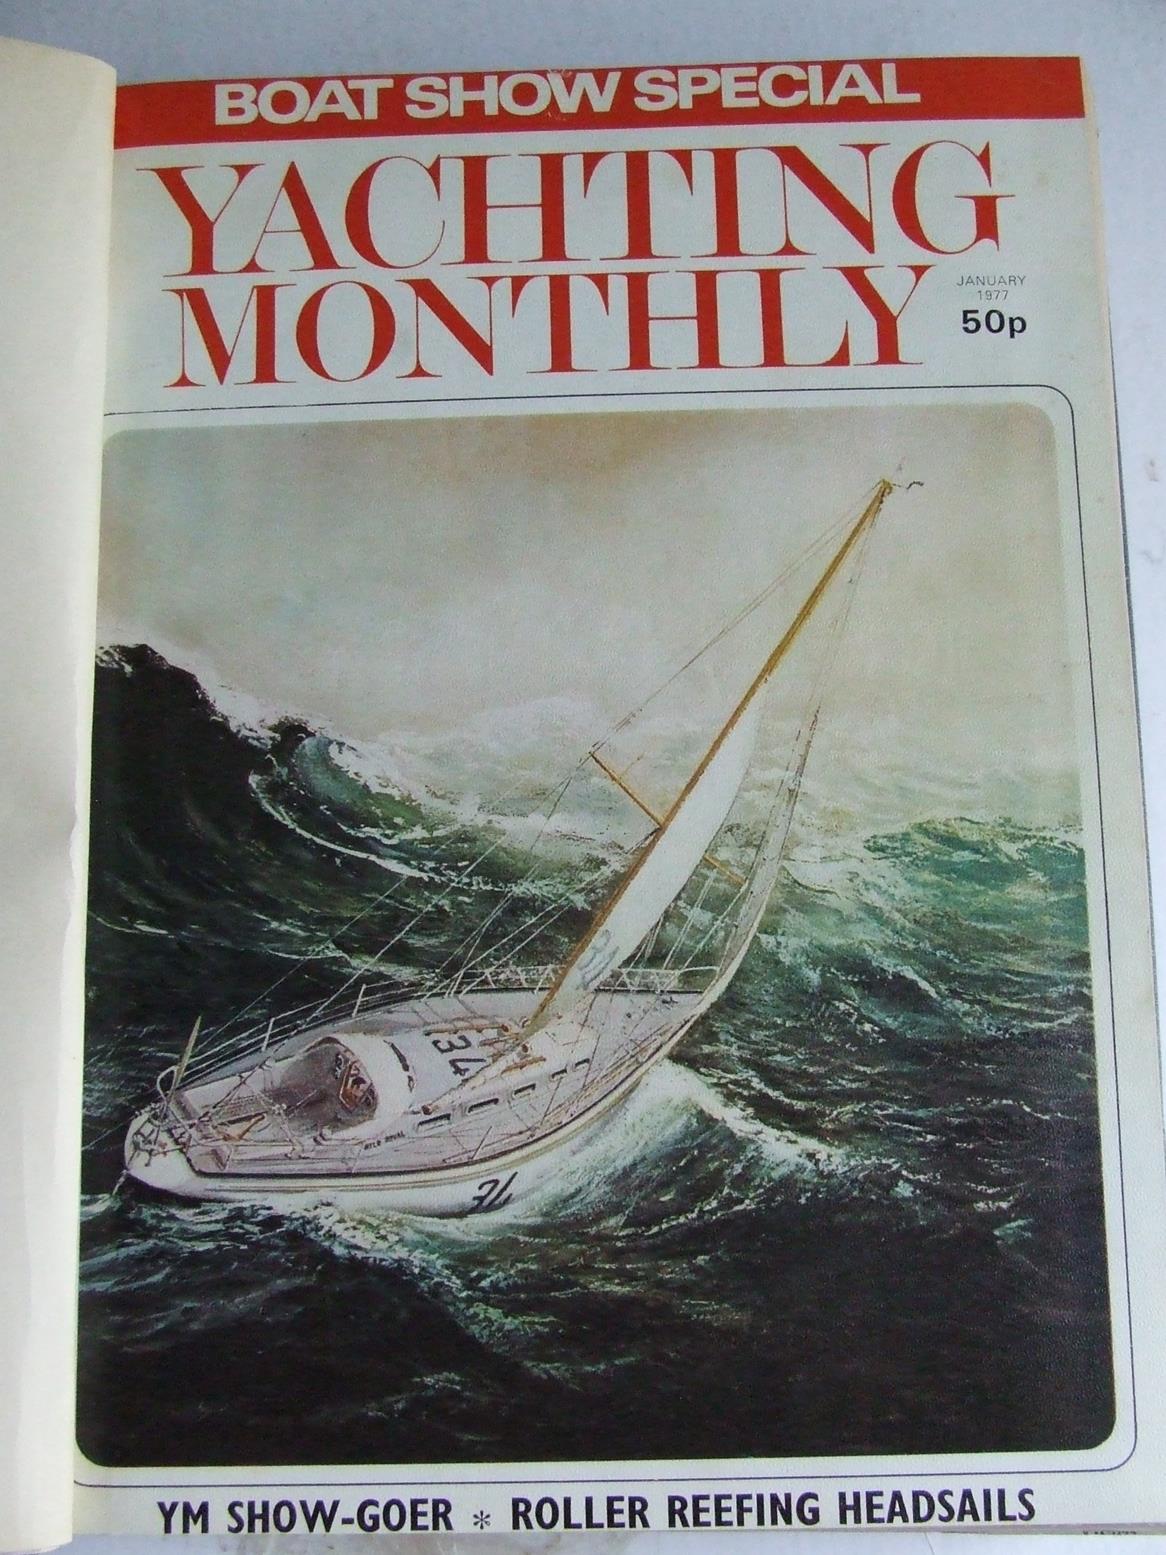 Yachting Monthly volume 137, January - December 1977